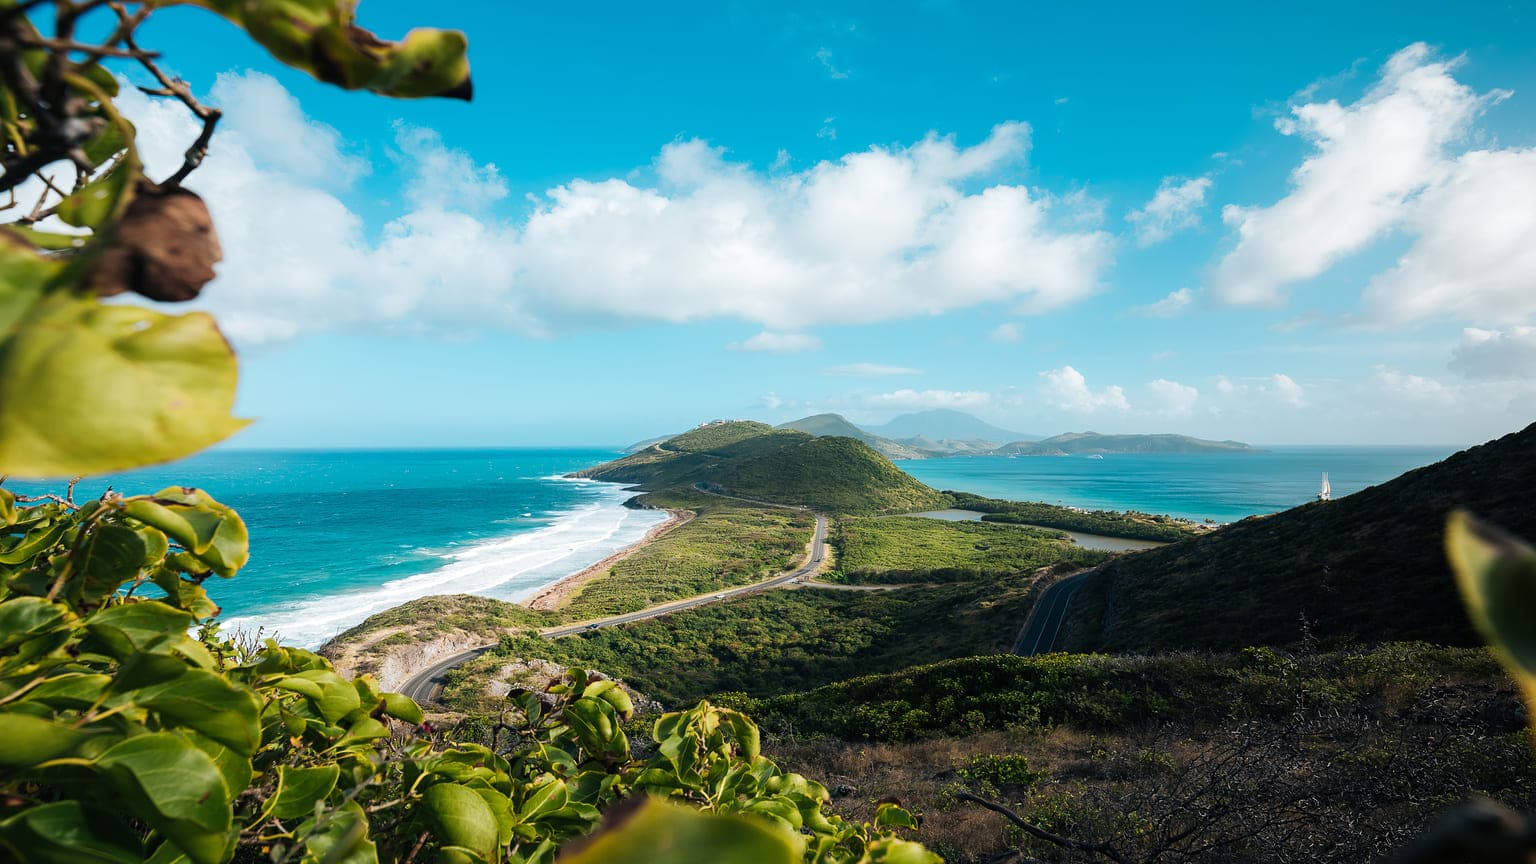 Edited St Kitts And Nevis Island Wallpaper